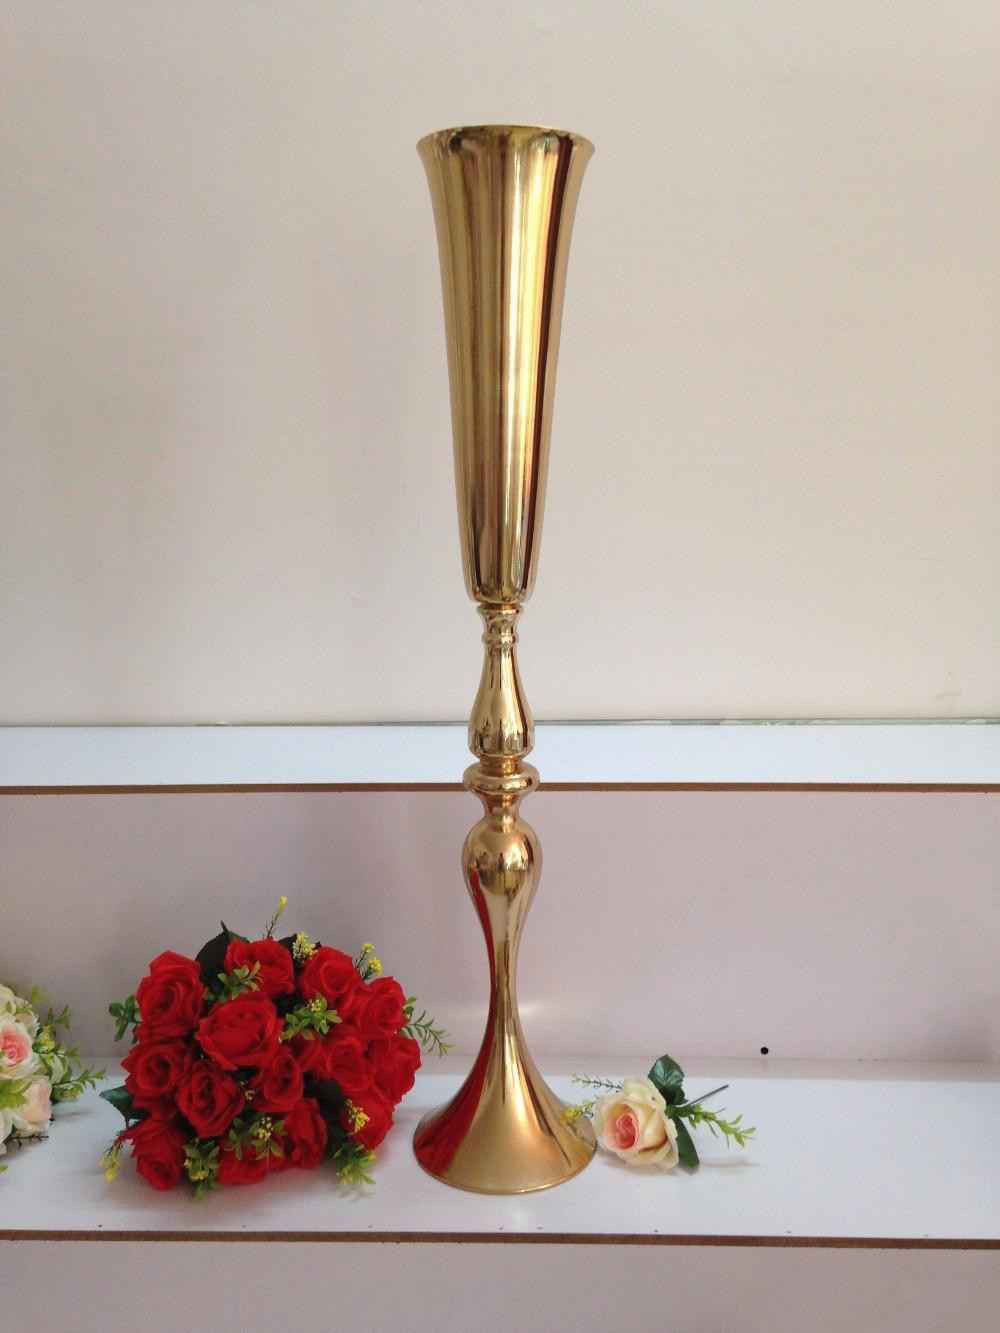 24 Stylish Pedestal Flower Vase 2024 free download pedestal flower vase of faux crystal candle holders alive vases gold tall jpgi 0d cheap in with regard to faux crystal candle holders alive vases gold tall jpgi 0d cheap in crystal candle ho